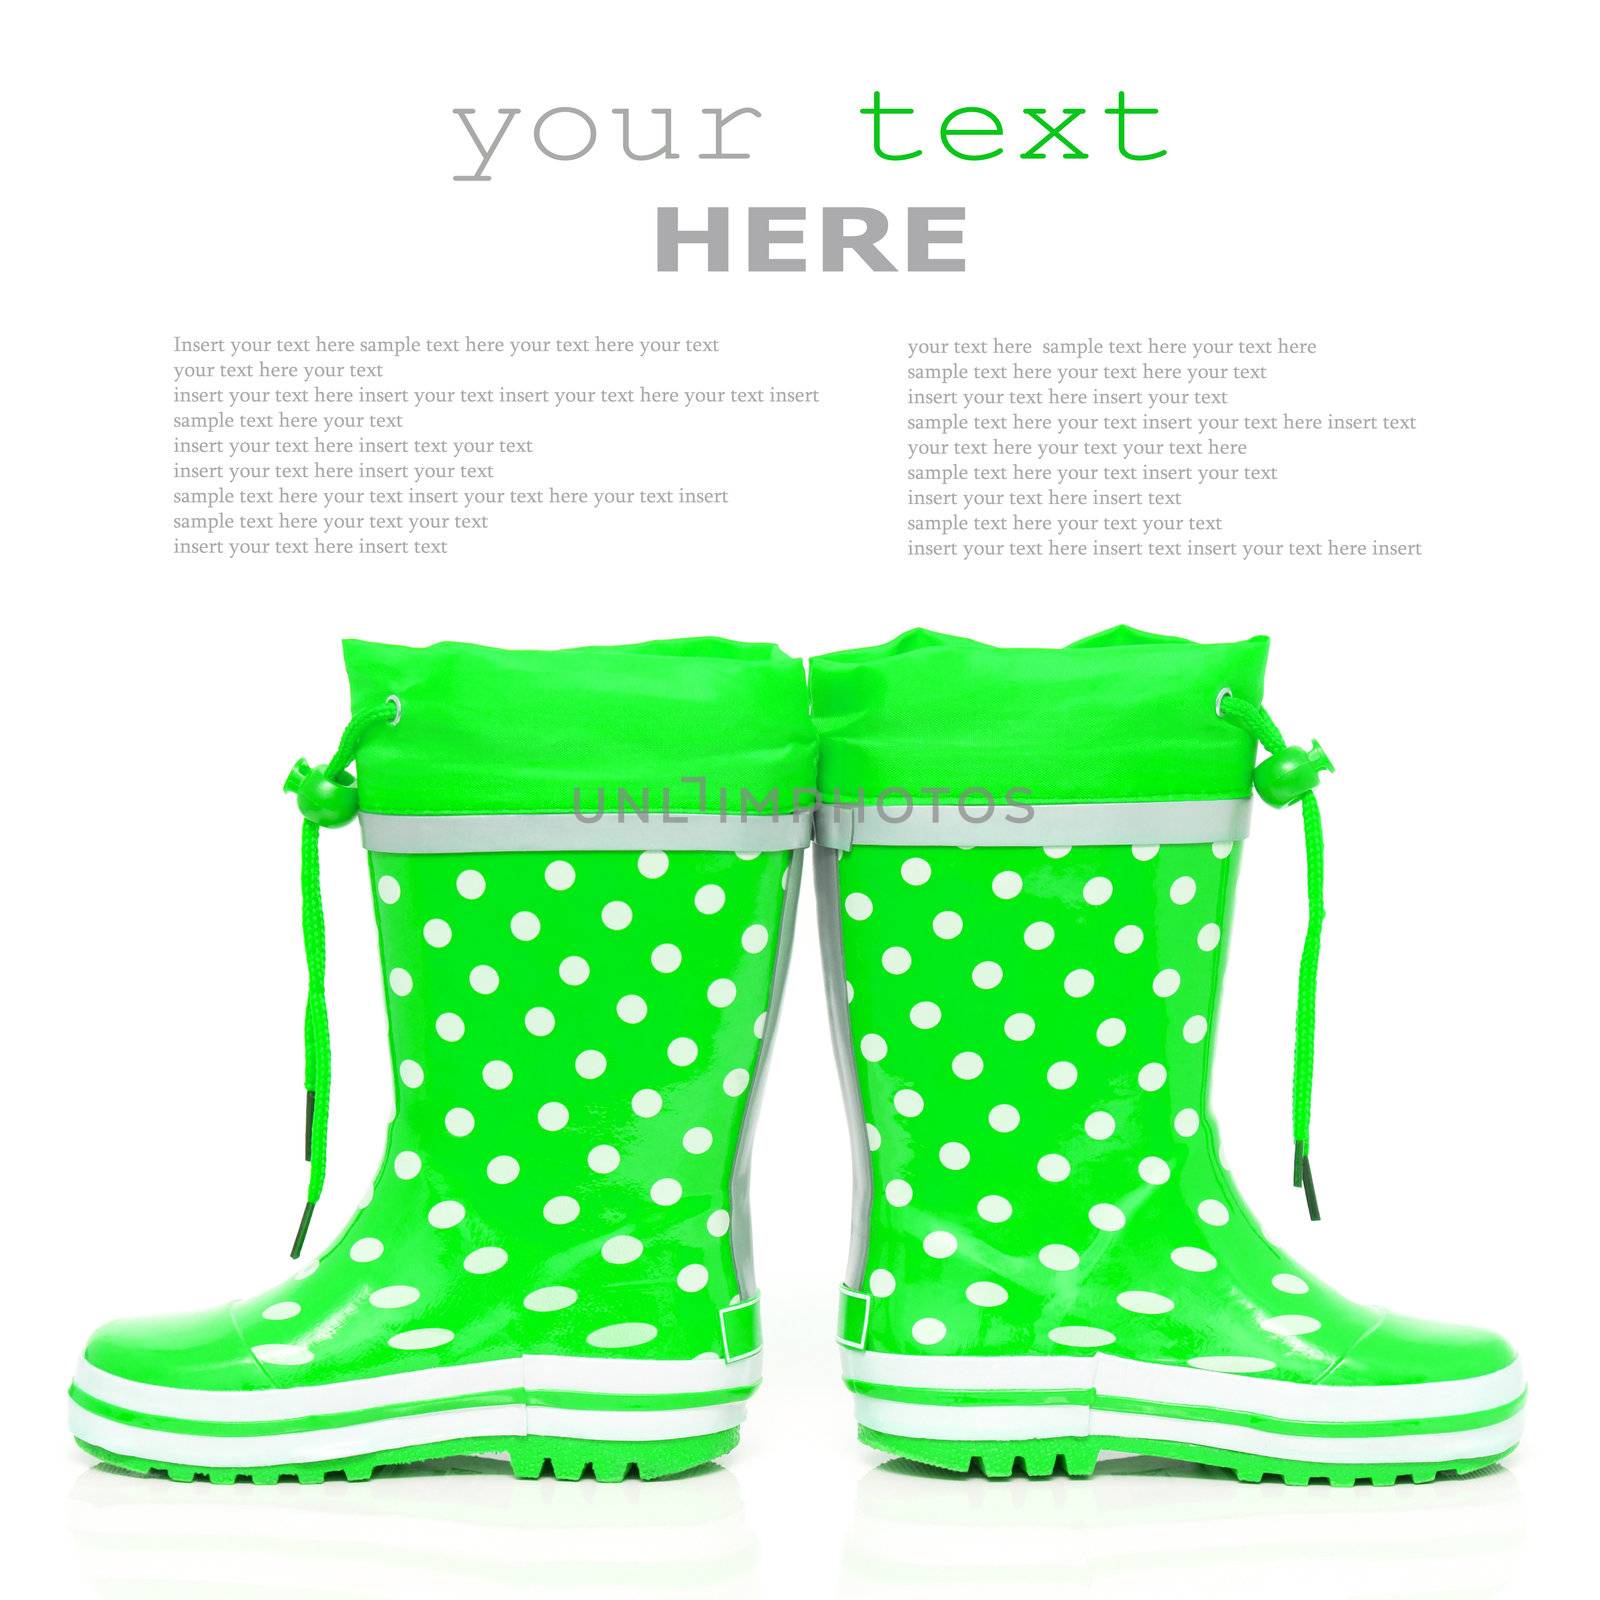 Green rubber boots for kids isolated on white background (with sample text)